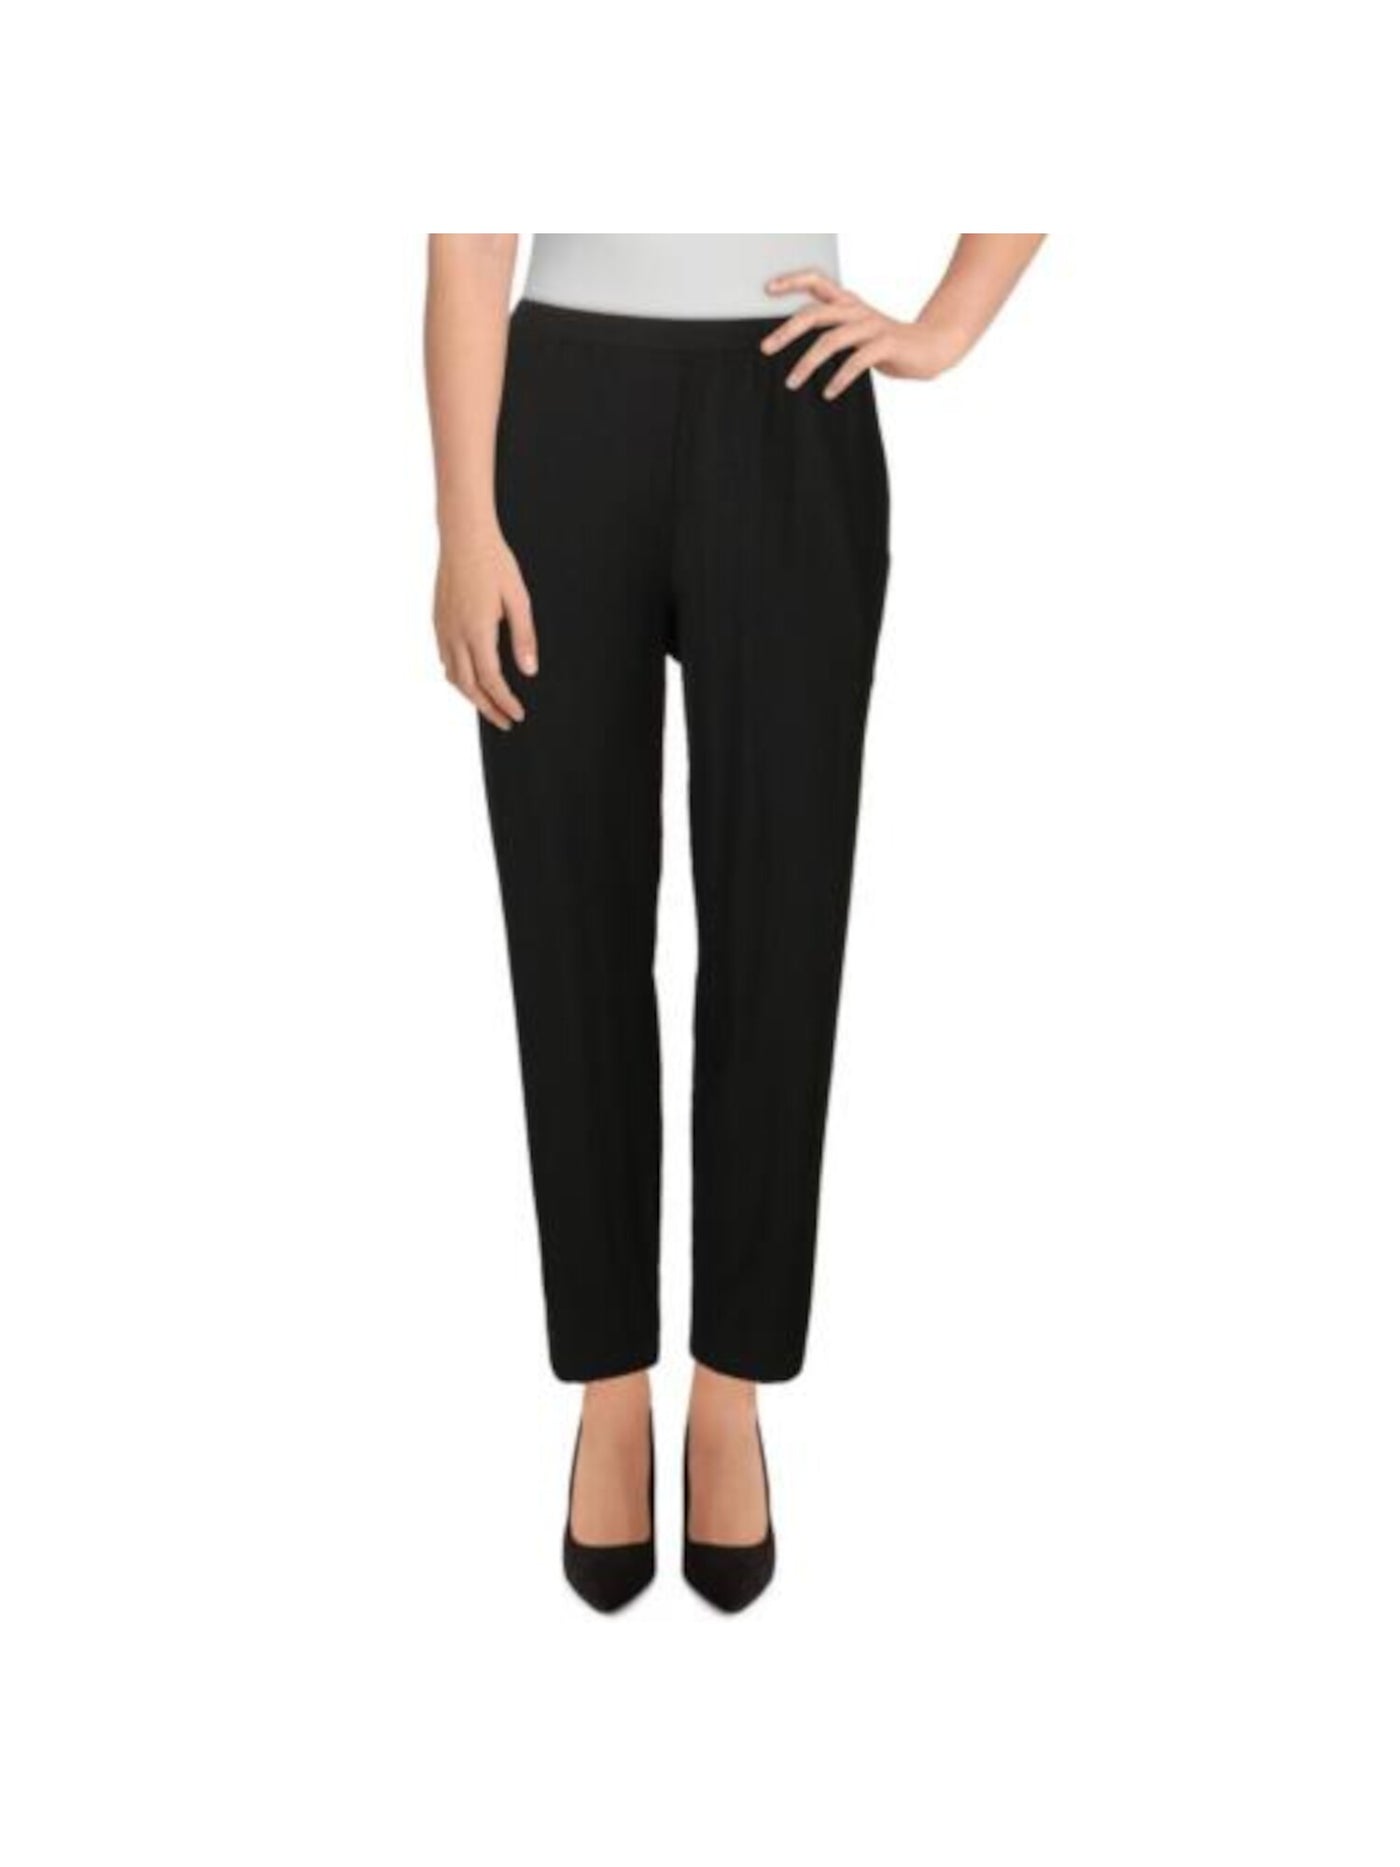 EILEEN FISHER Womens Stretch Zippered Tapered Ankle Pants Wear To Work Pants